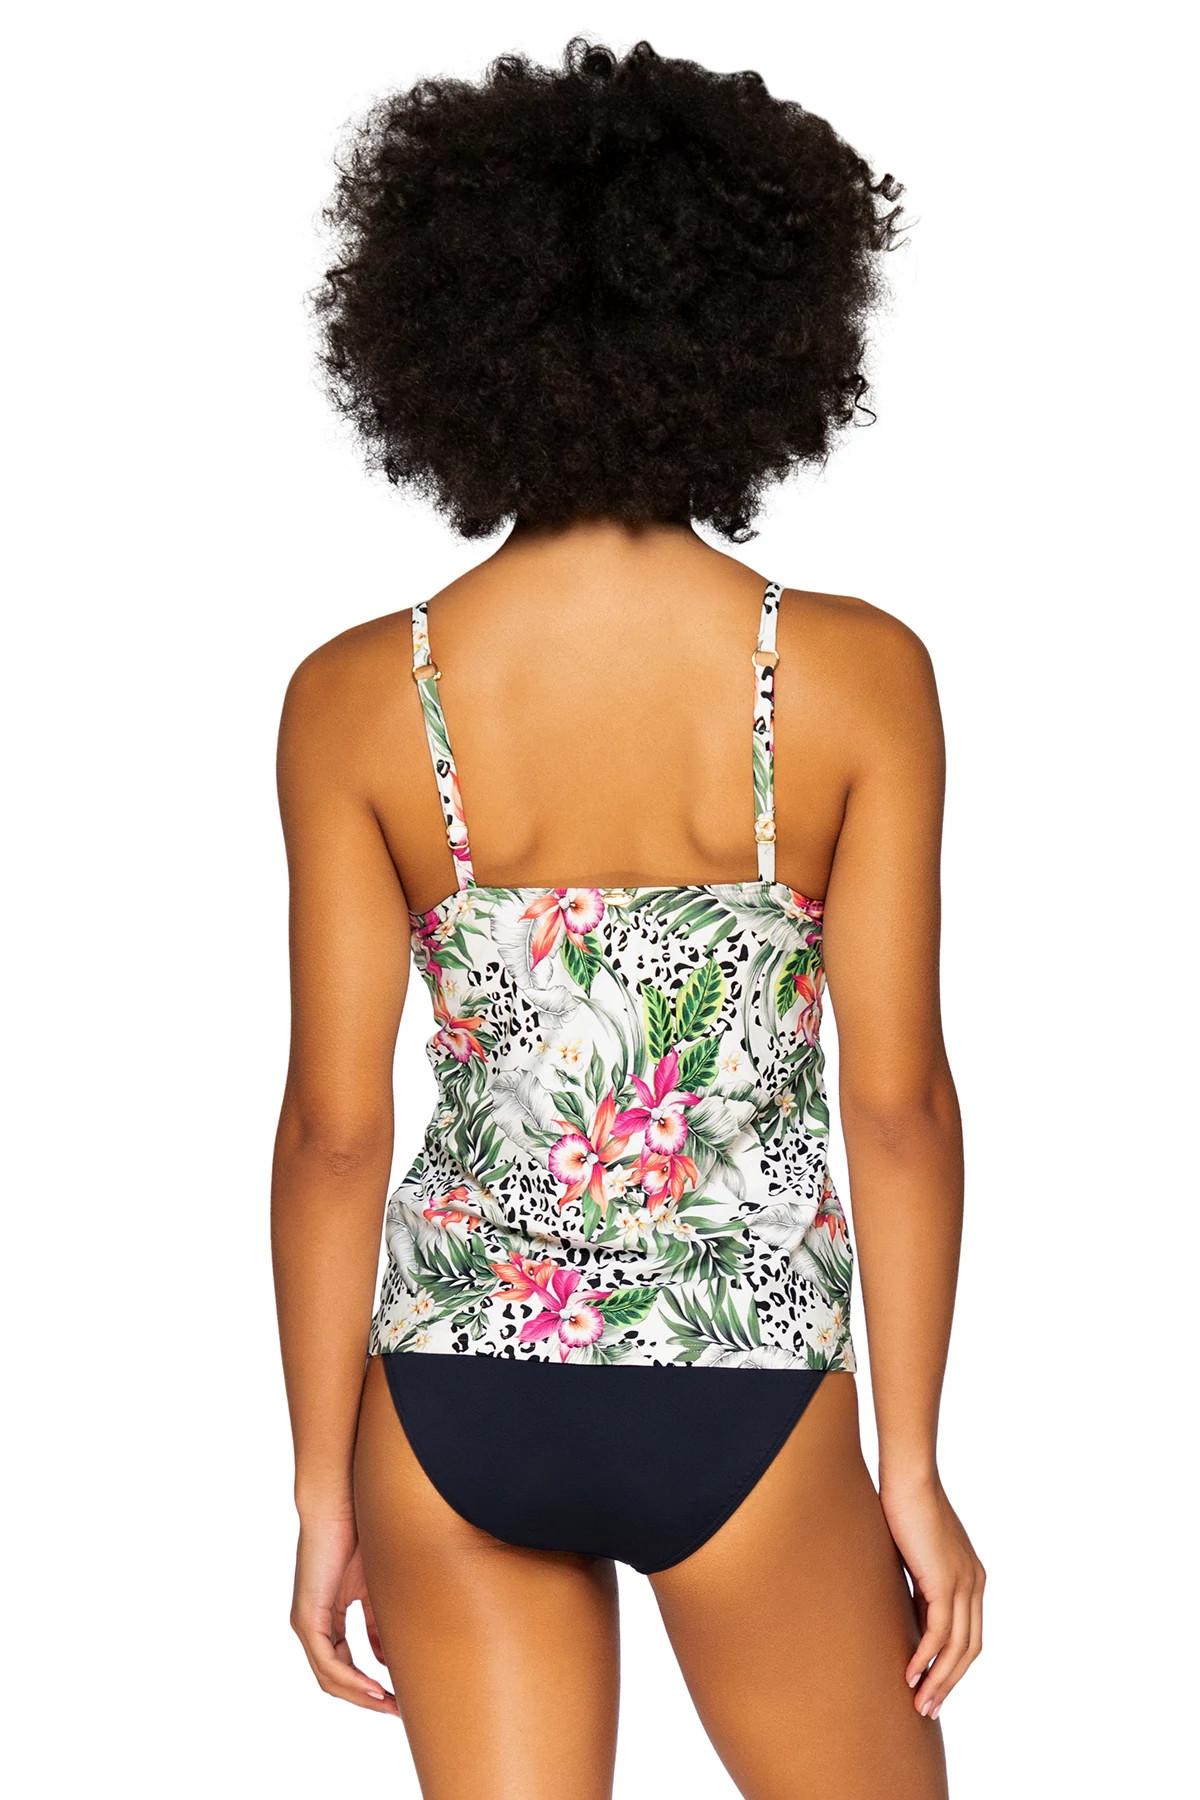 JUNGLE BOOK Tankini Top (D+ Cup) image number 2